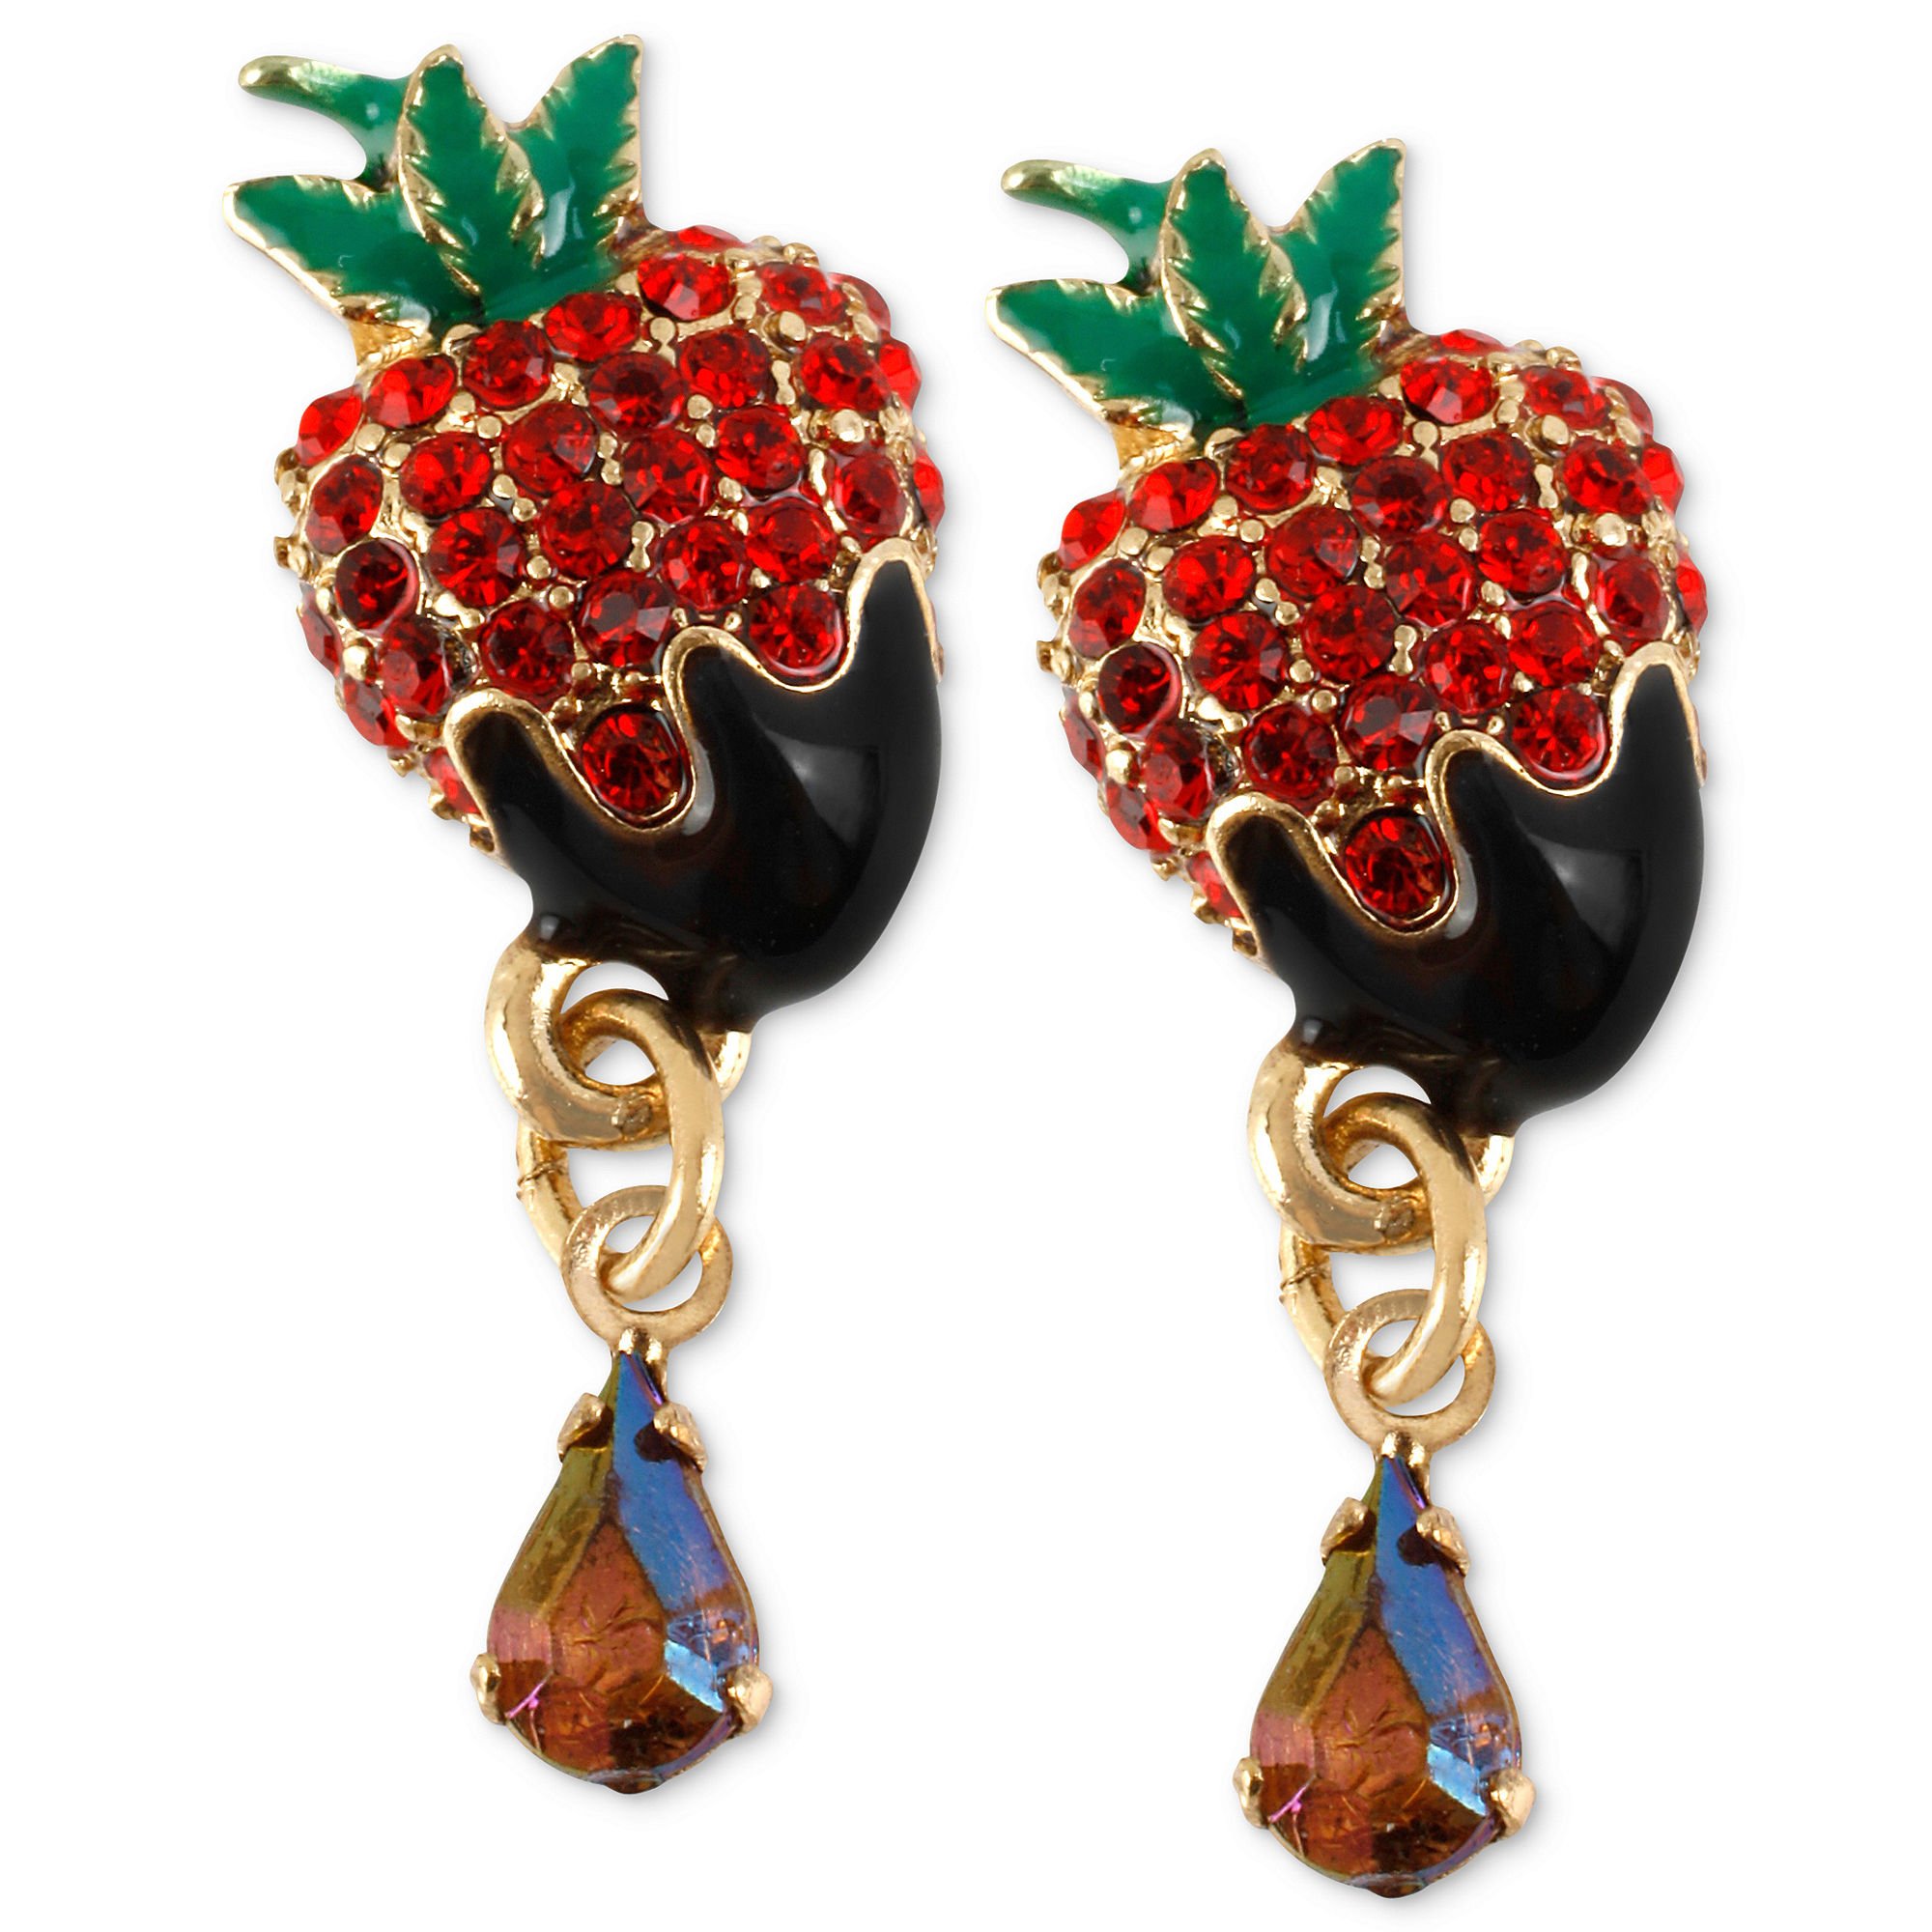 Betsey johnson Antique Goldtone Chocolate Strawberry Stud Earrings in ...